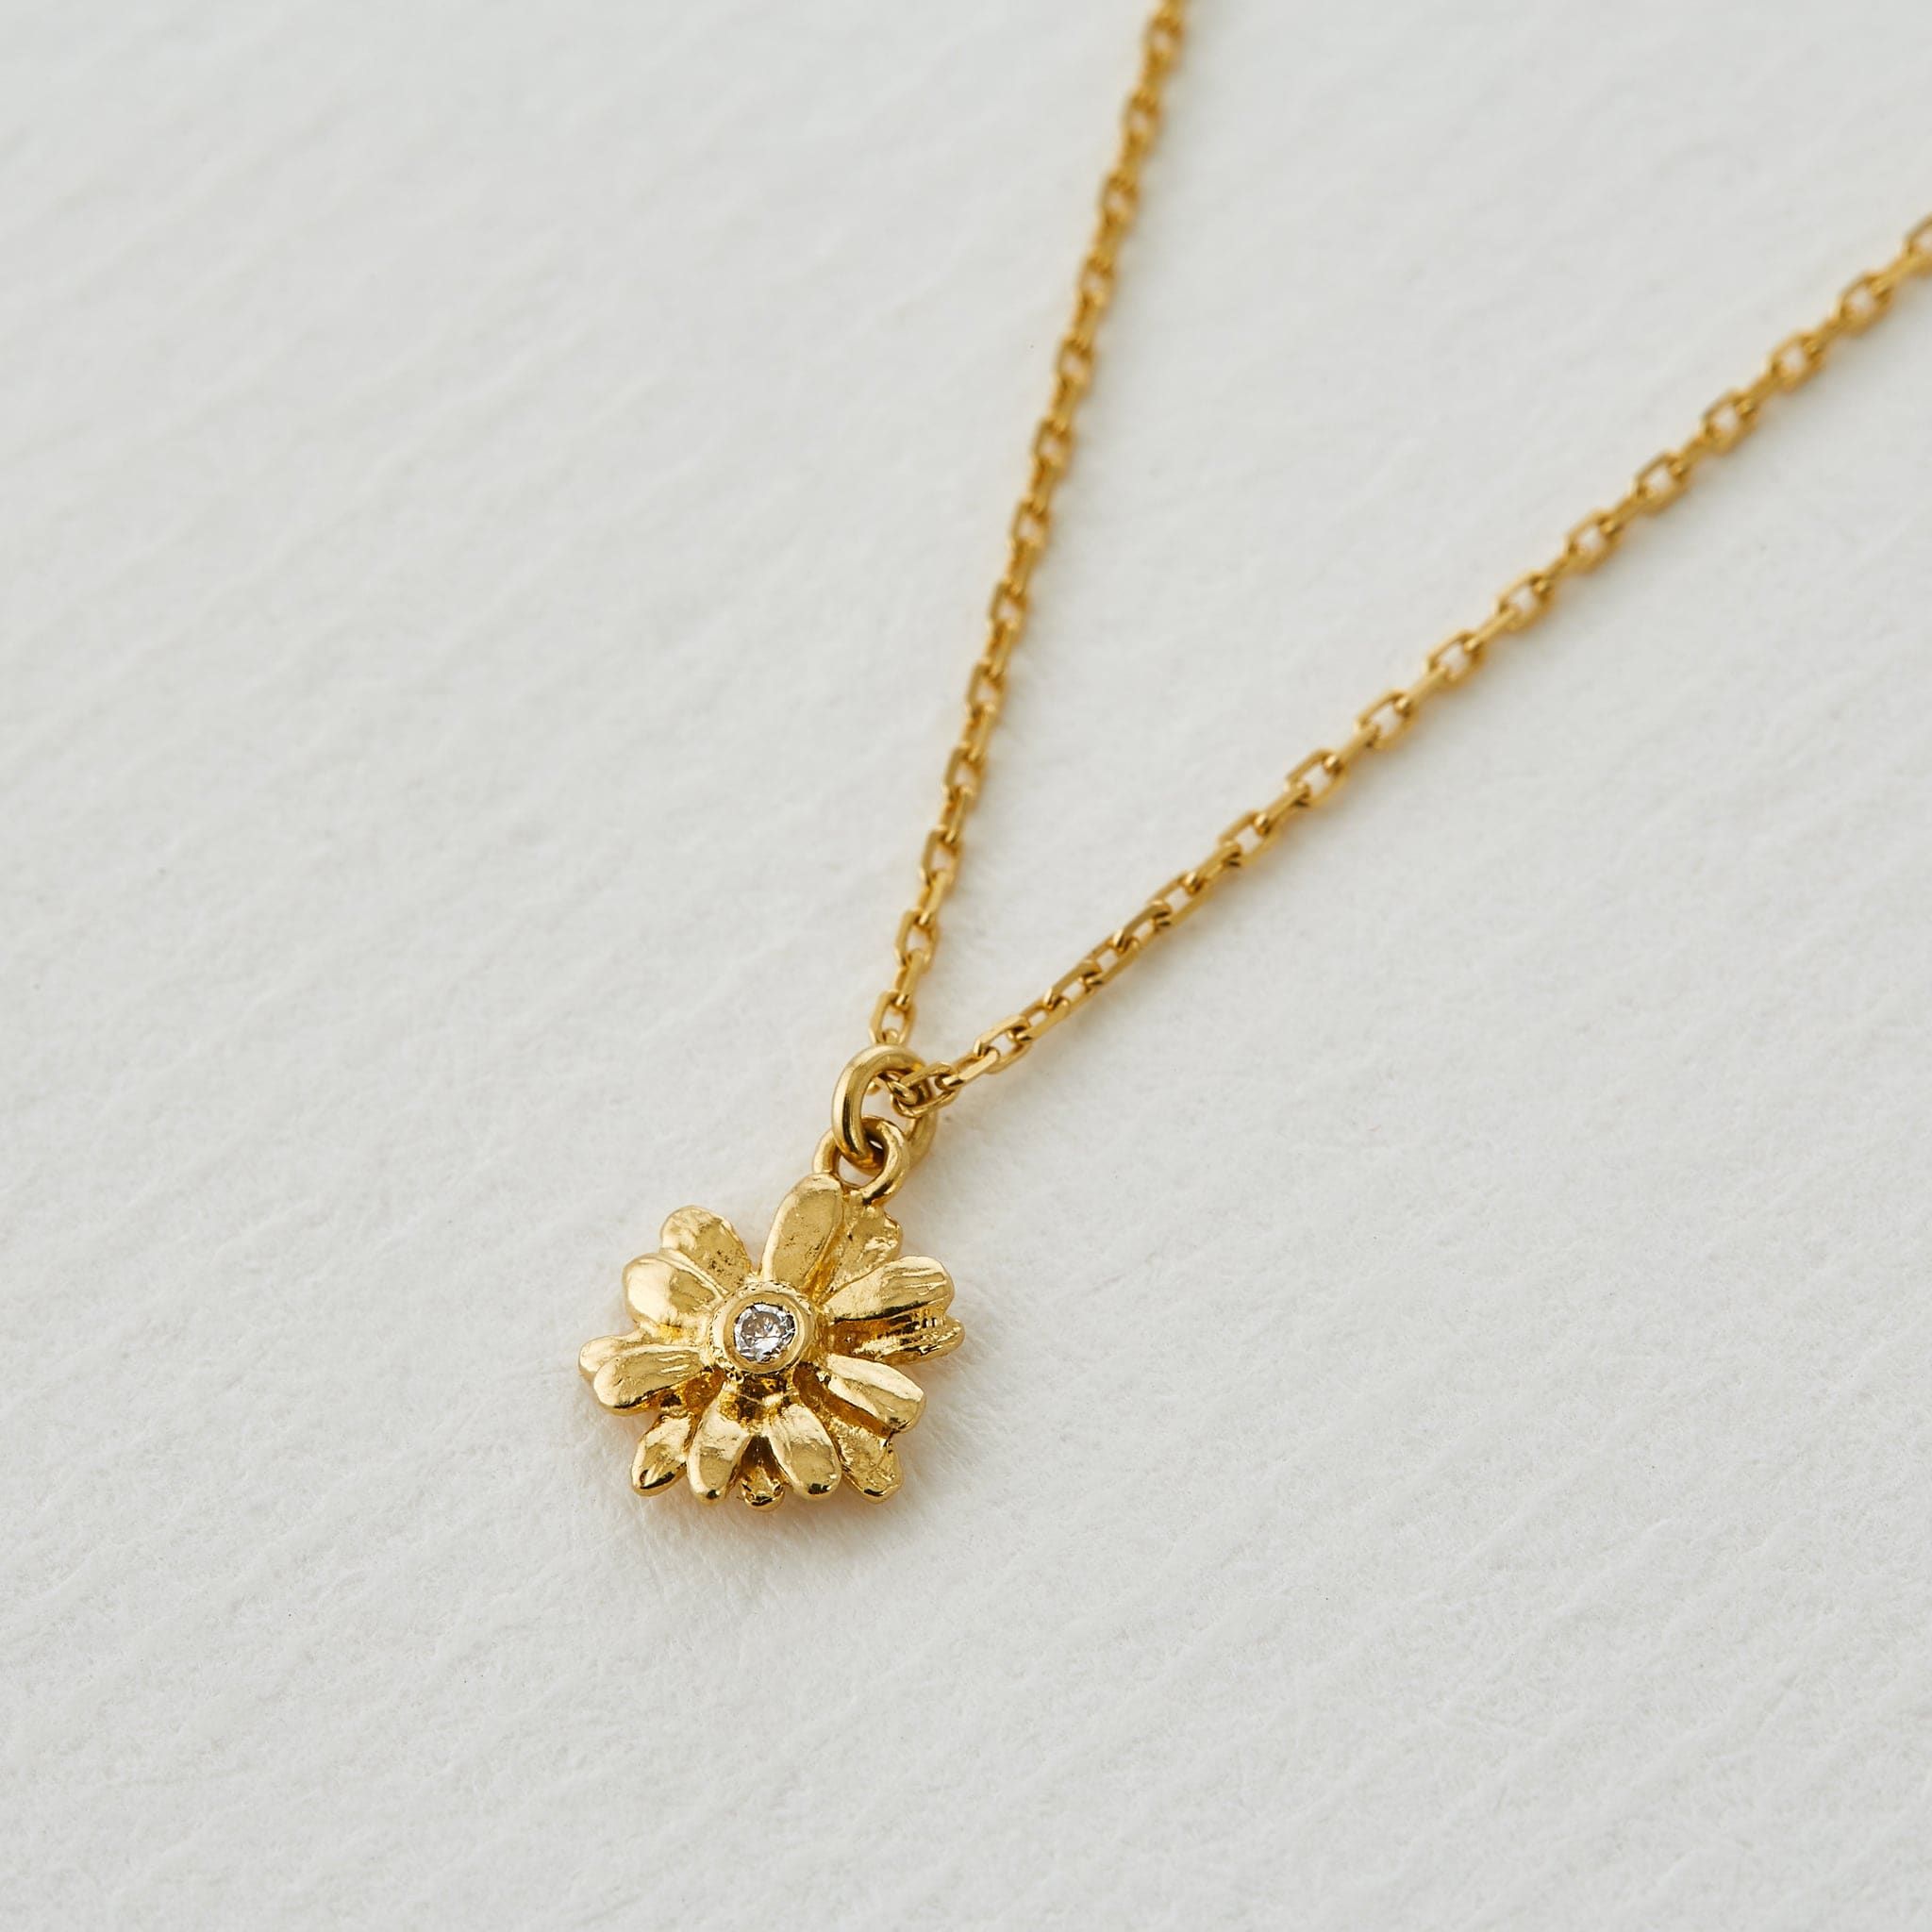 Barrymore Necklace | Gold Pearl 90's Daisy Necklace | Larissa Loden